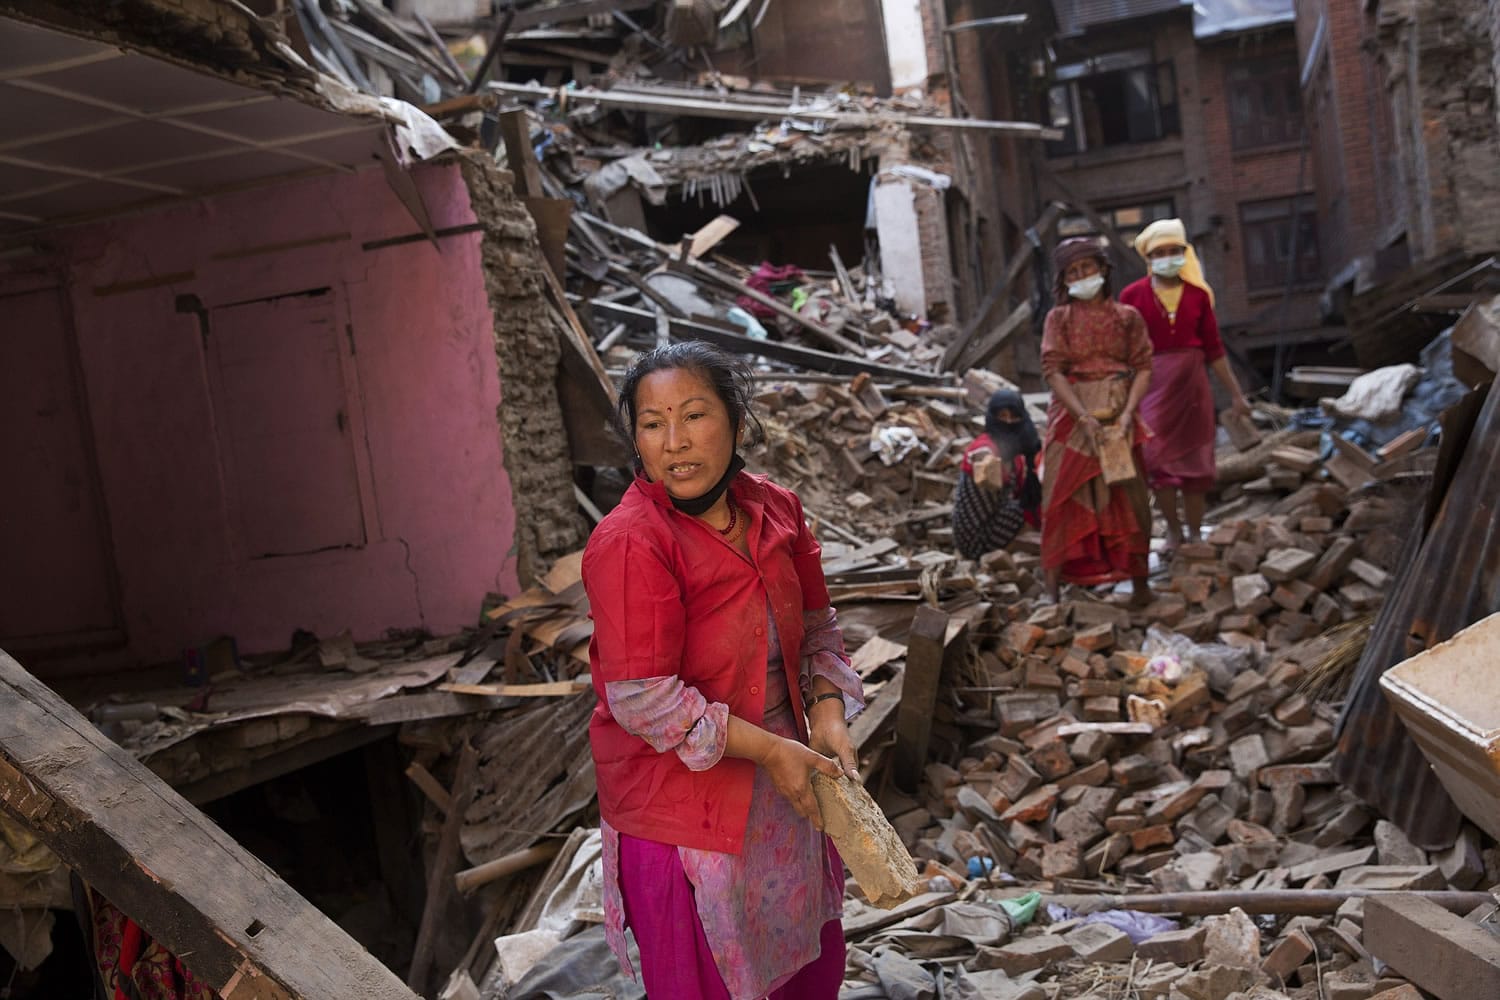 Bernat Amangue/Associated Press
Women search Sunday for belongings from their house that was destroyed in the April 25 quake in Bhaktapur, Nepal. The U.N. says the quake affected 8.1 million people -- more than a quarter of Nepal's 28 million people.